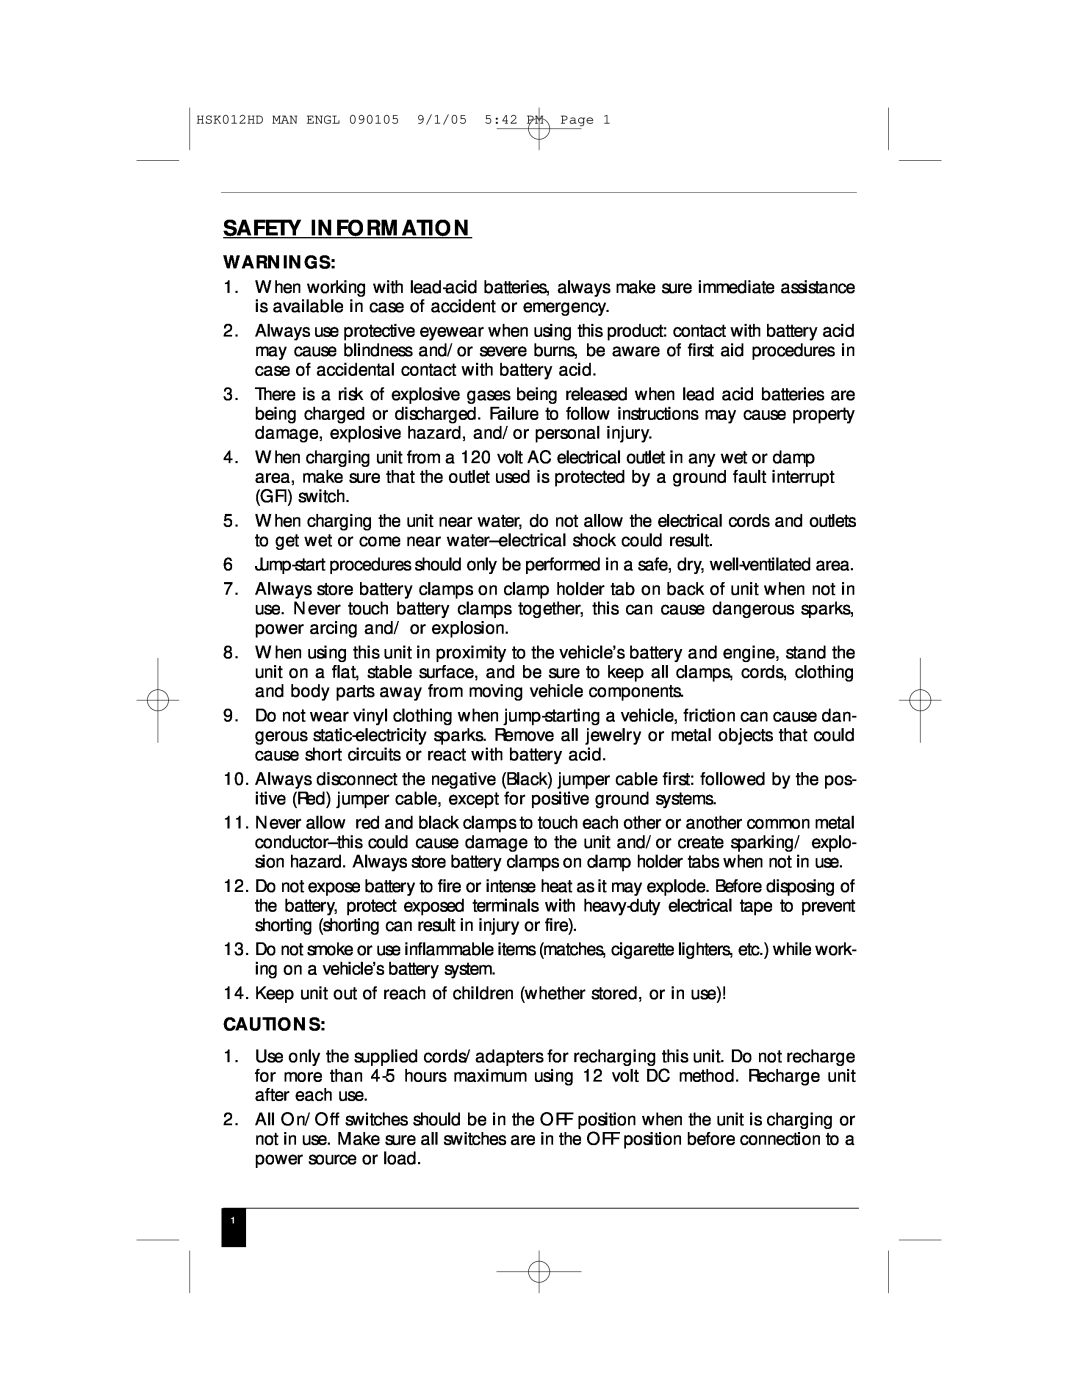 Husky HSK012HD manual Safety Information, Warnings, Cautions 